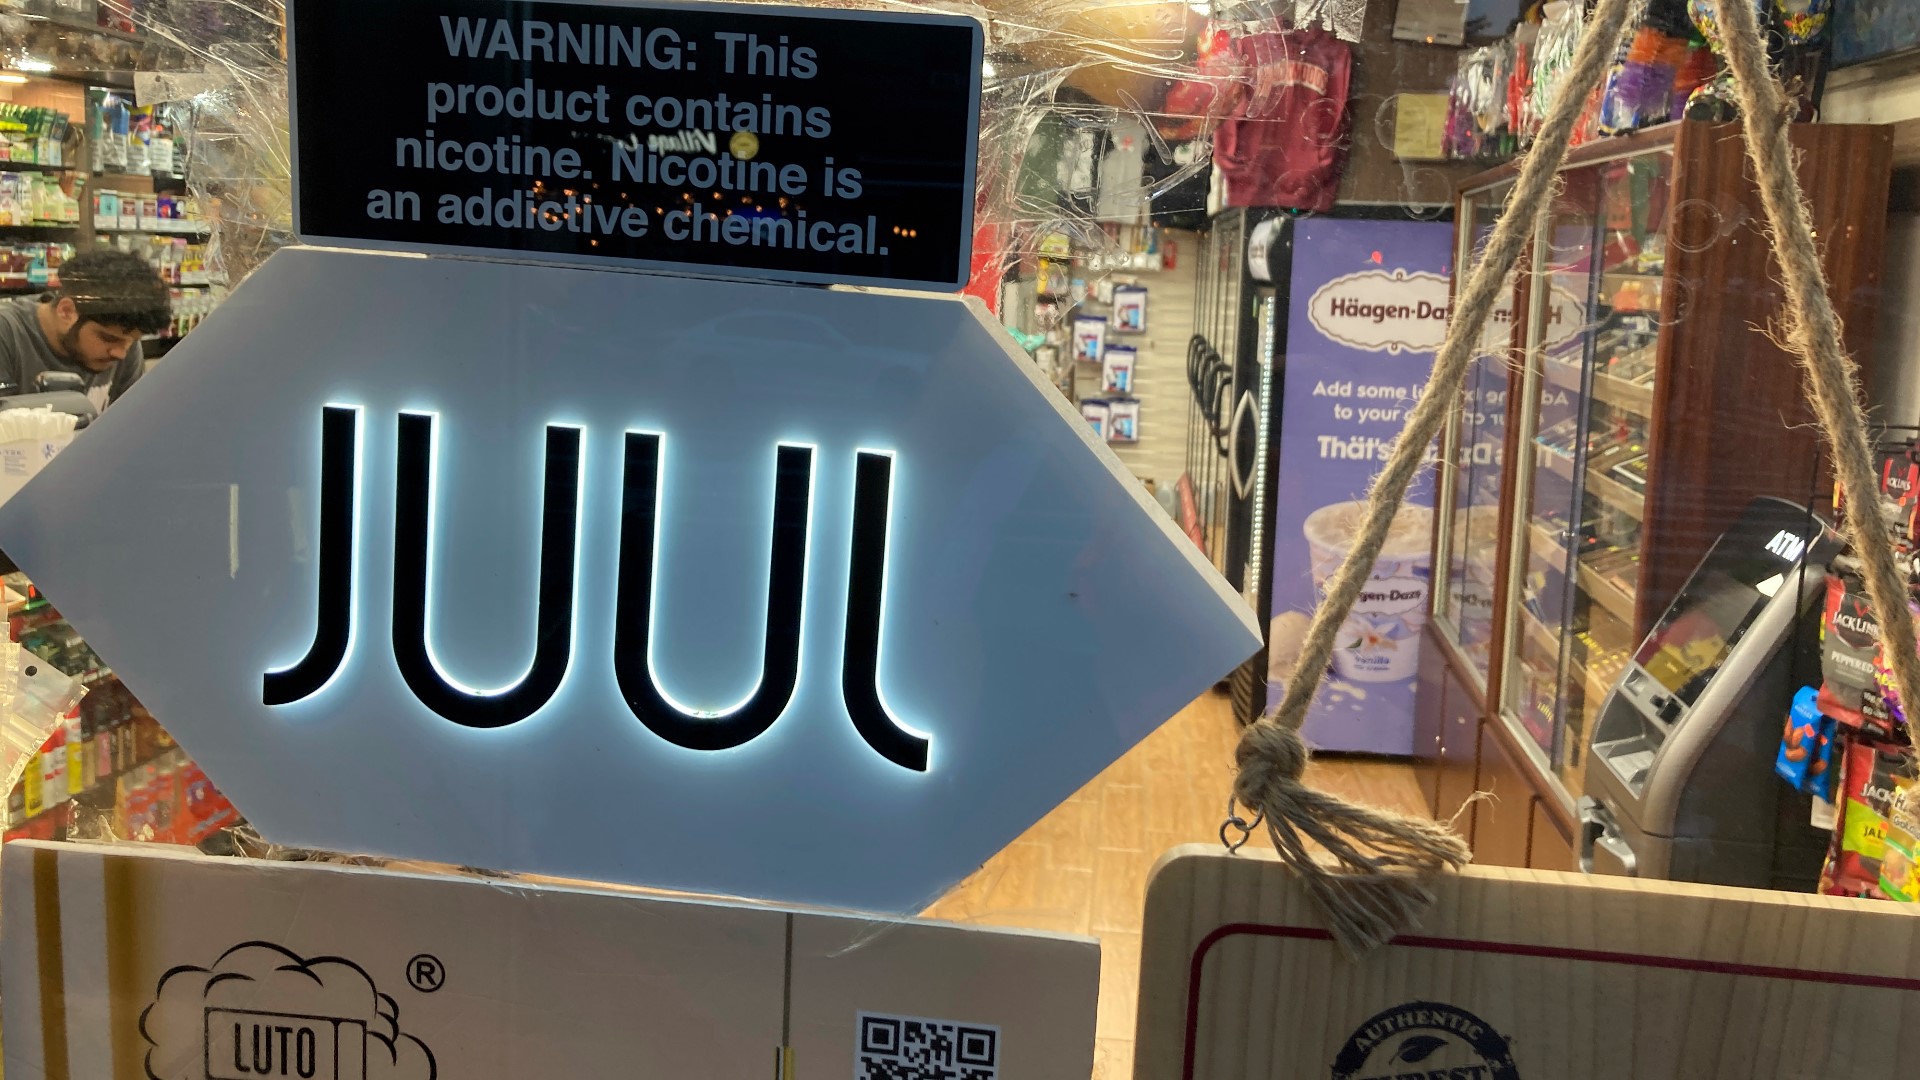 The agreement settles allegations that JUUL Labs engaged in deceptive marketing and sales practices.